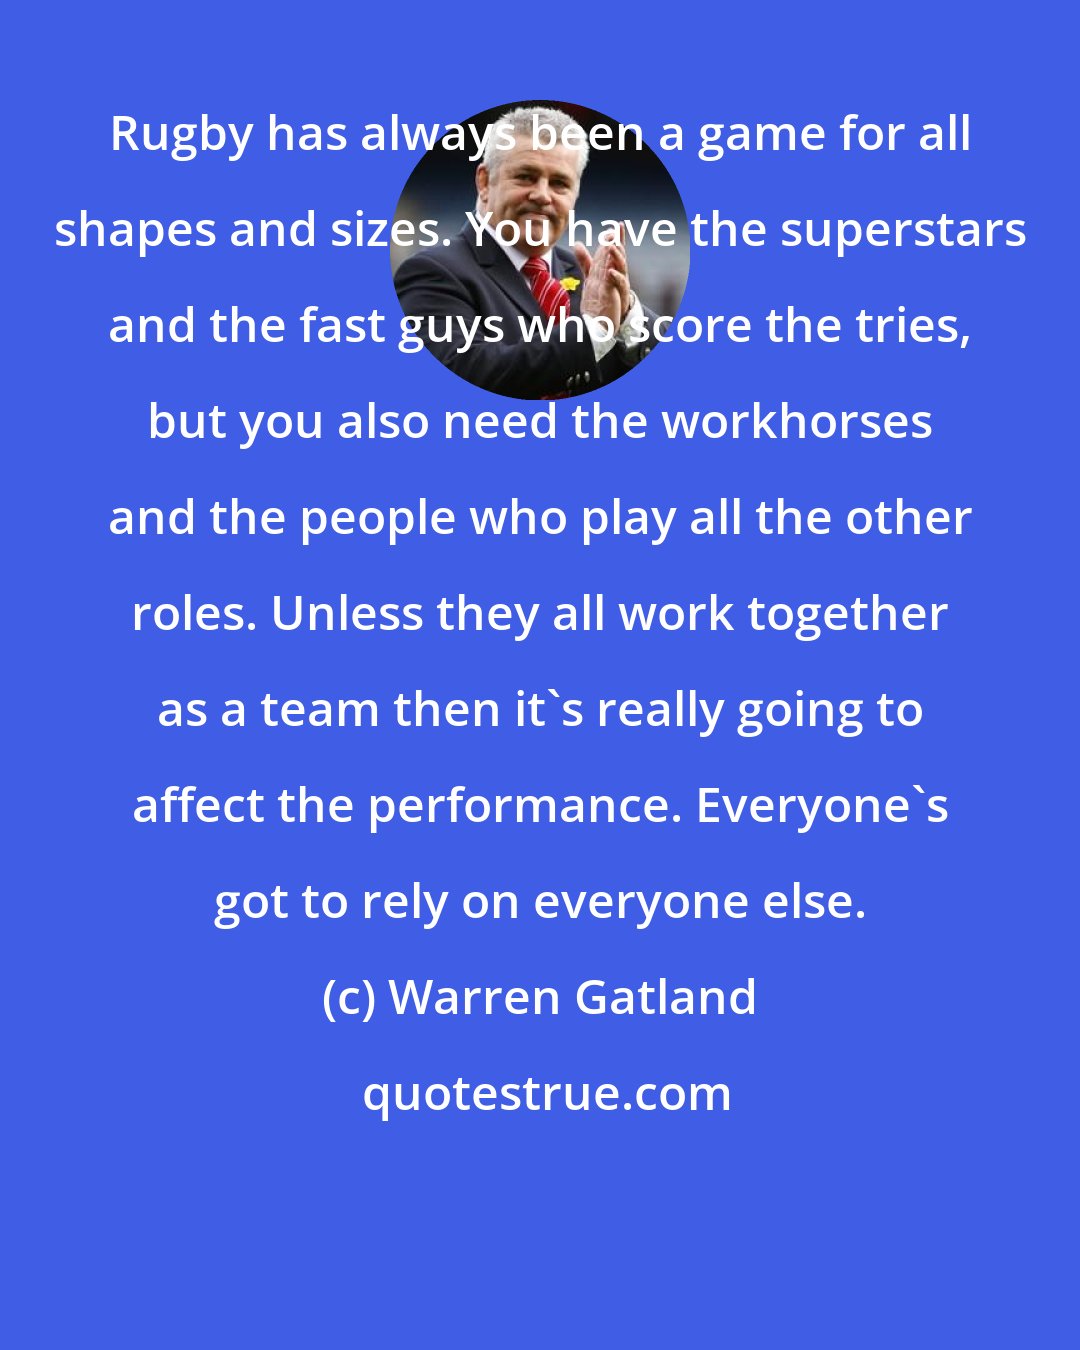 Warren Gatland: Rugby has always been a game for all shapes and sizes. You have the superstars and the fast guys who score the tries, but you also need the workhorses and the people who play all the other roles. Unless they all work together as a team then it's really going to affect the performance. Everyone's got to rely on everyone else.